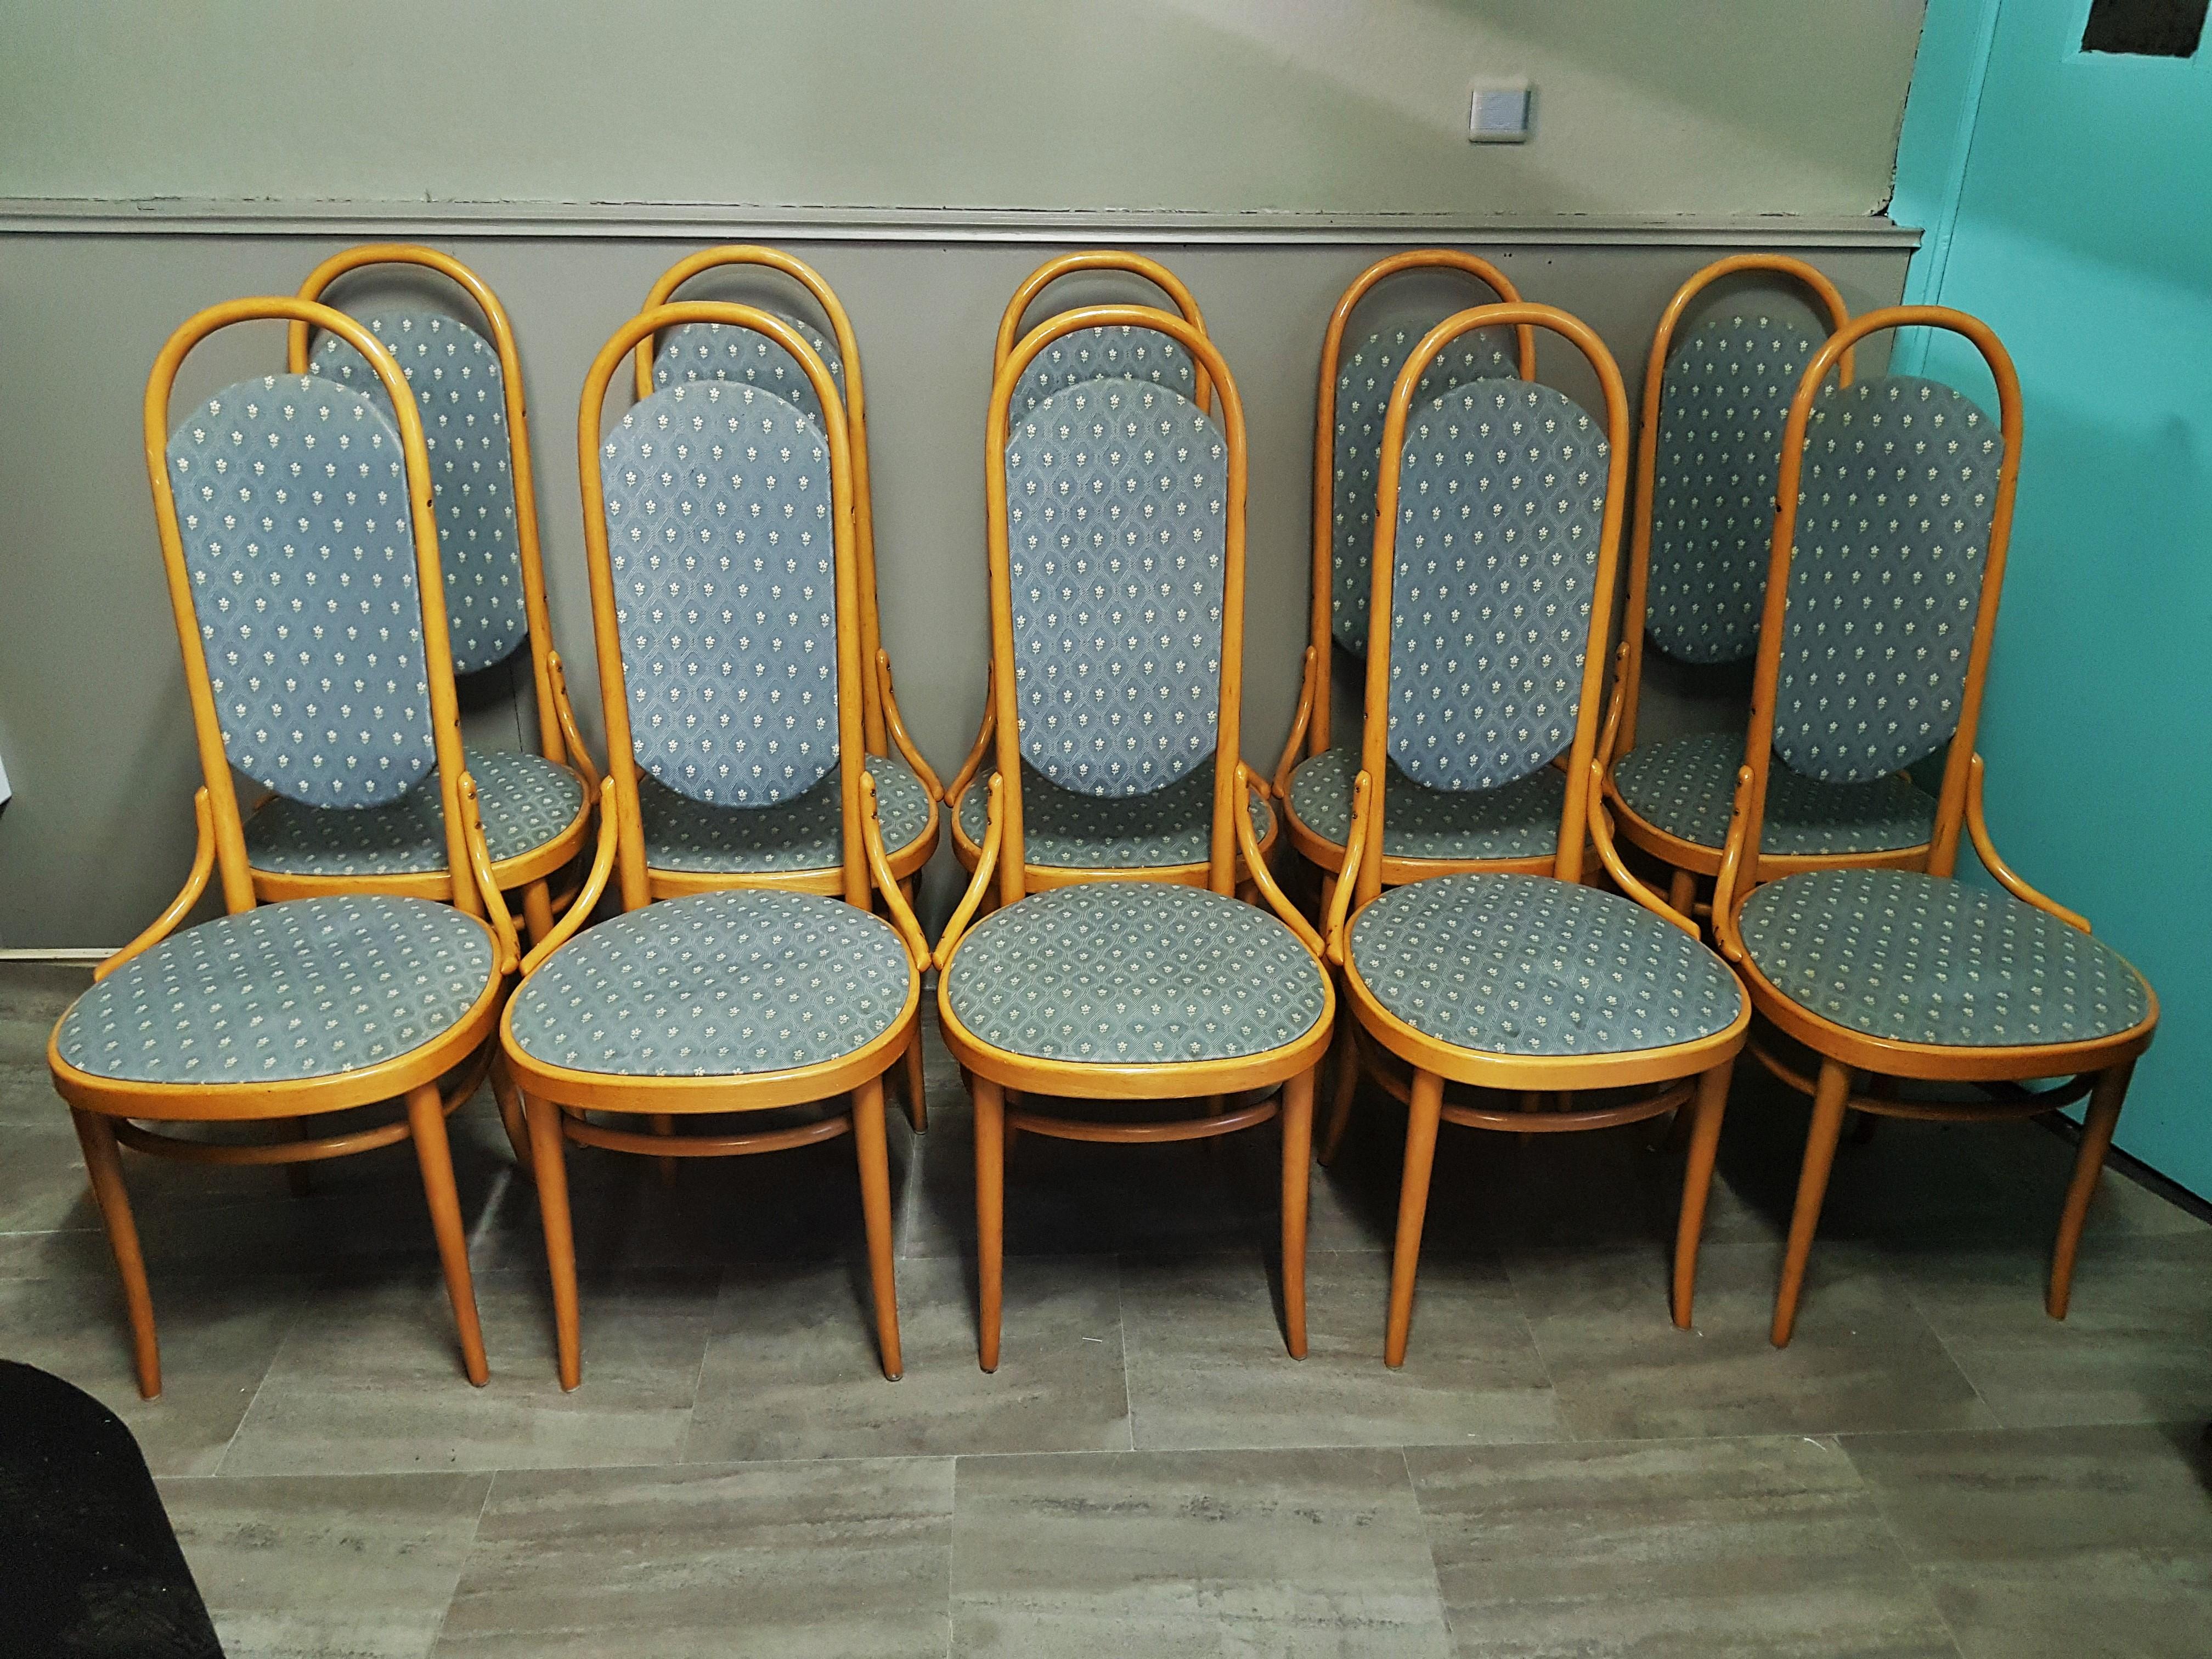 Set of 10 Thonet high back bentwood beech chairs.

Solid and stable. Signed.

Fabric can be changed easily.